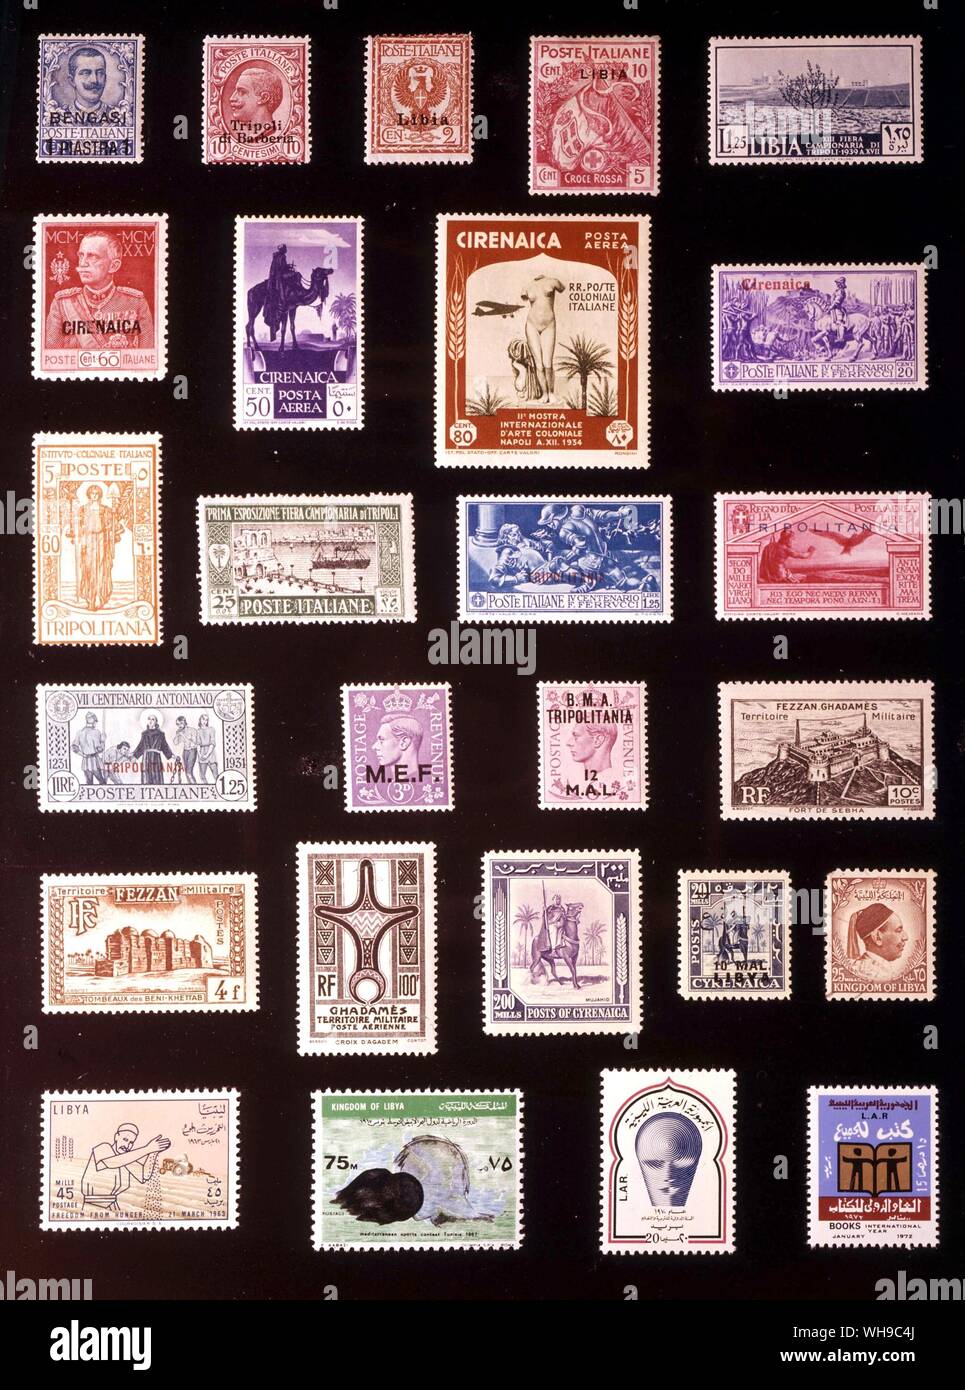 AFRICA - LIBYA: (left to right) 1. Bengasi, 1 piastre, 1911, 2. Tripoli, 10 centesimi, 1909, 3. Libya, 2 centesimi, 1912, 4. Libya, 10 + 5 centesimi, 1915, 5. Libya, 1.25 lire, 1939, 6. Cyrenaic, 60 centesimi, 1925, 7. Cyrenaica, 50 centesimi, 1932, 8. Cyrenaica, 80 centesimi, 1934, 9. Cyrenaica, 20 centesimi, 1930, 10. Tripolitania, 60 centesimi, 1926, 11. Tripolitania, 25 centesimi, 1927, 12. Tripolitania, 1.25 lire, 1930, 13. Tripolitania, 1 lira, 1930, 14. Tripolitania, 1.25 lire, 1931, 15. Middle East Forces, 3 pence, 1943, 16. Tripolitania, 12 M.A.L., 1948, 17. Fezzan and Ghadames, 10 Stock Photo